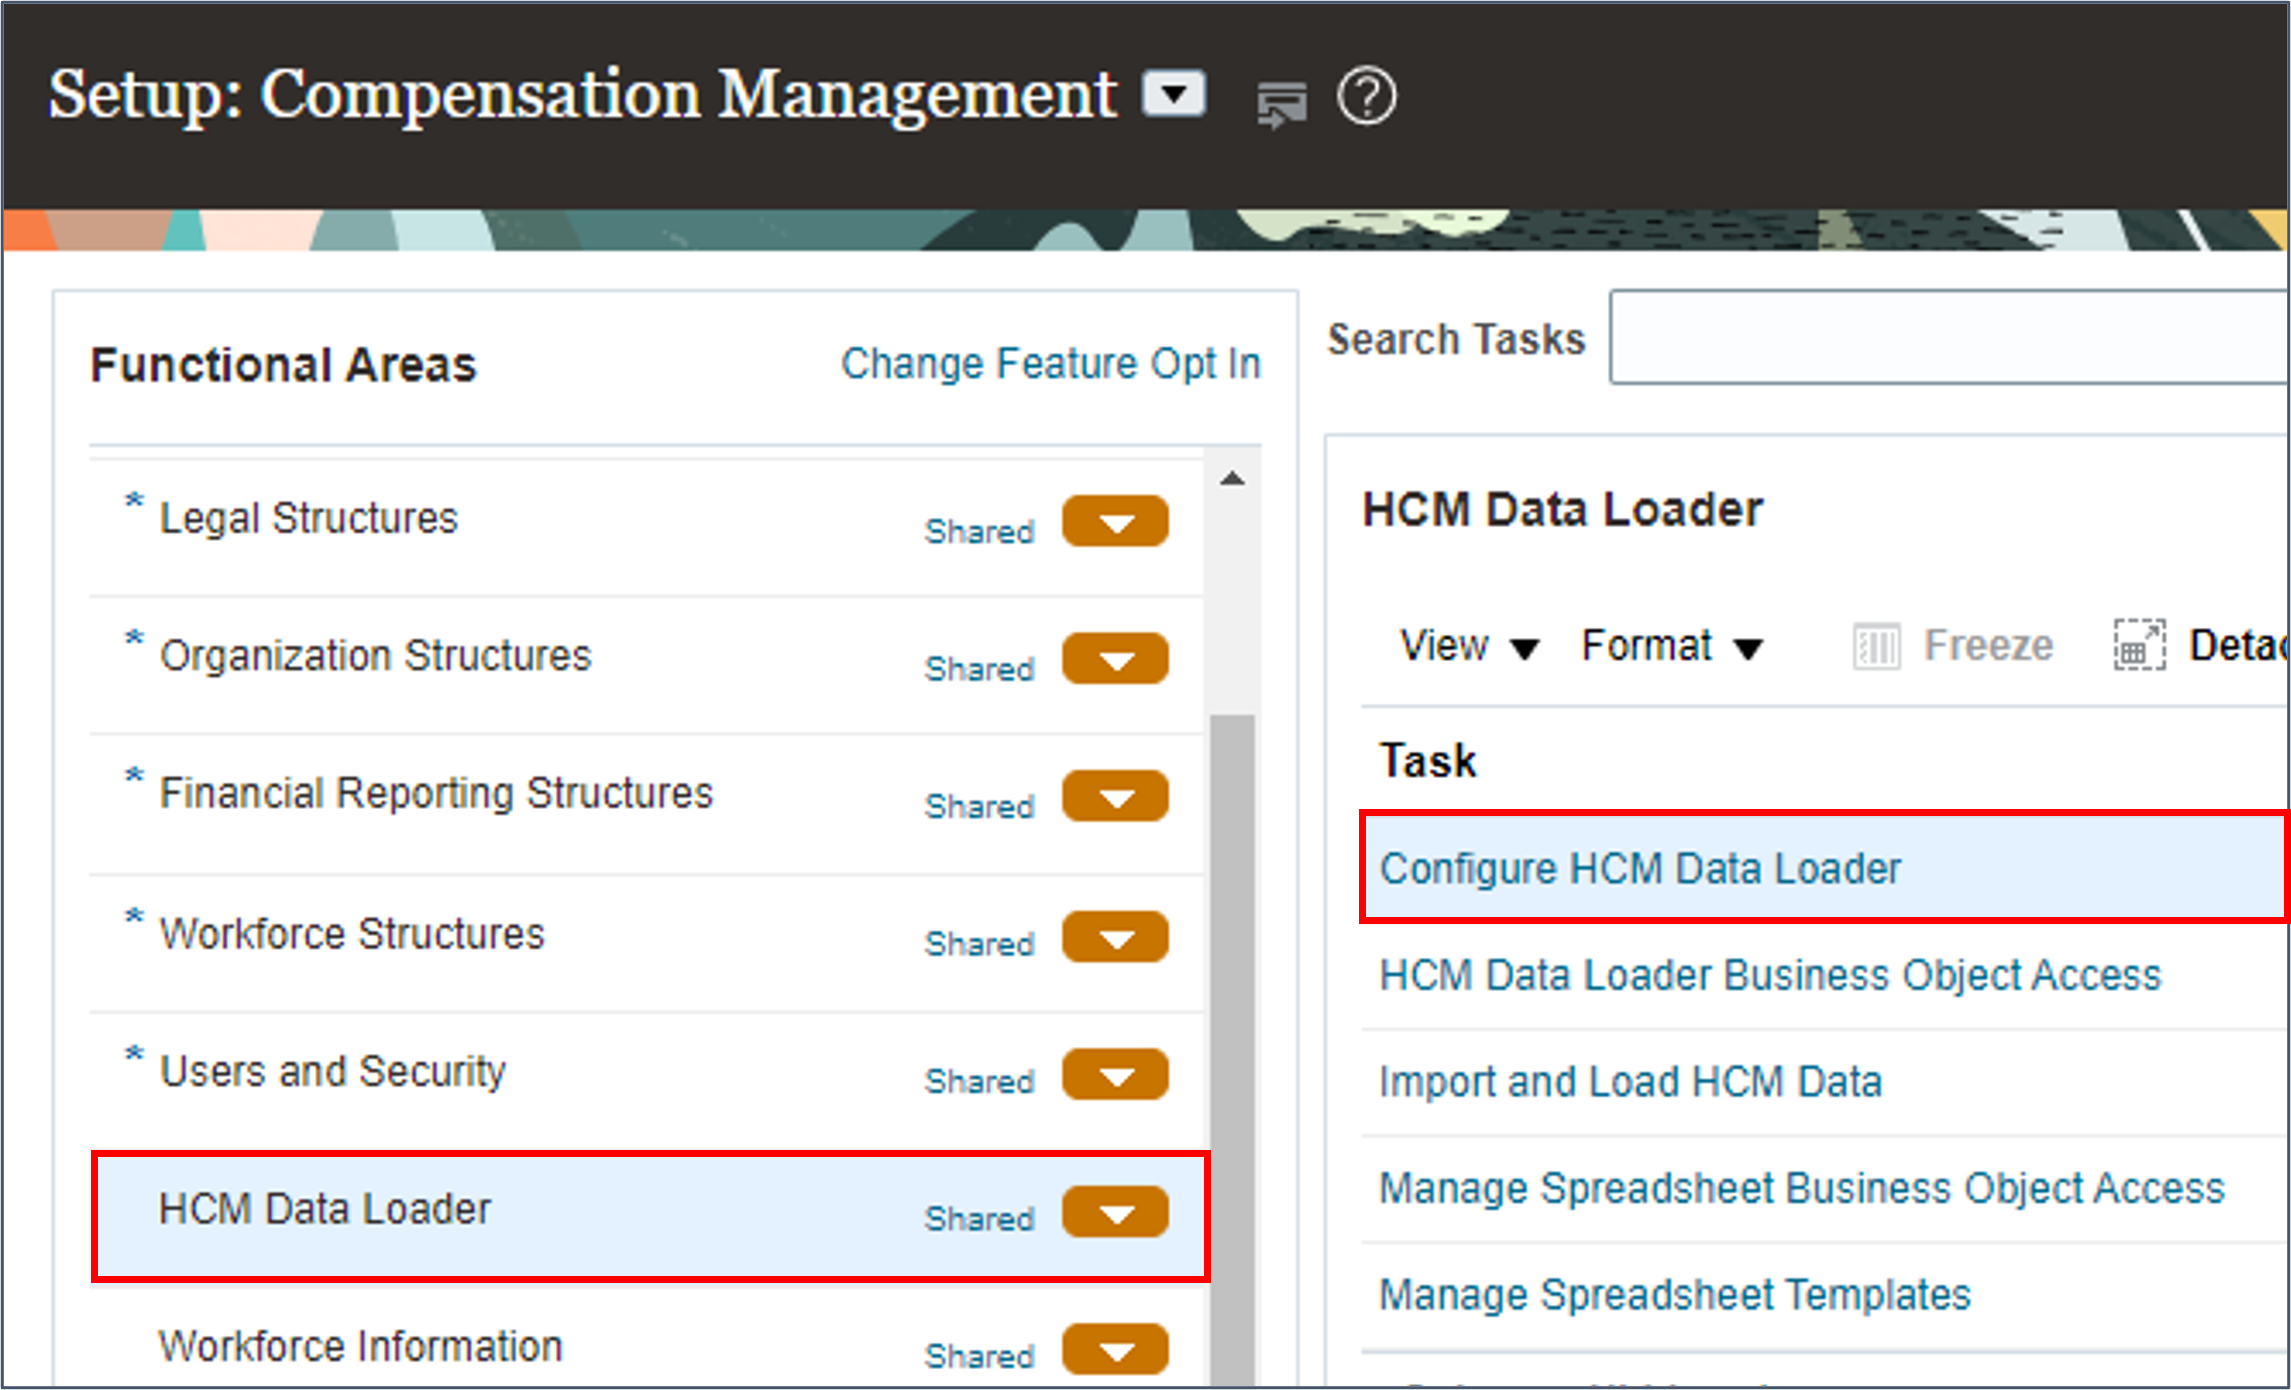 Select the Configure HCM Data Loader task from the HCM Data Loader functional area